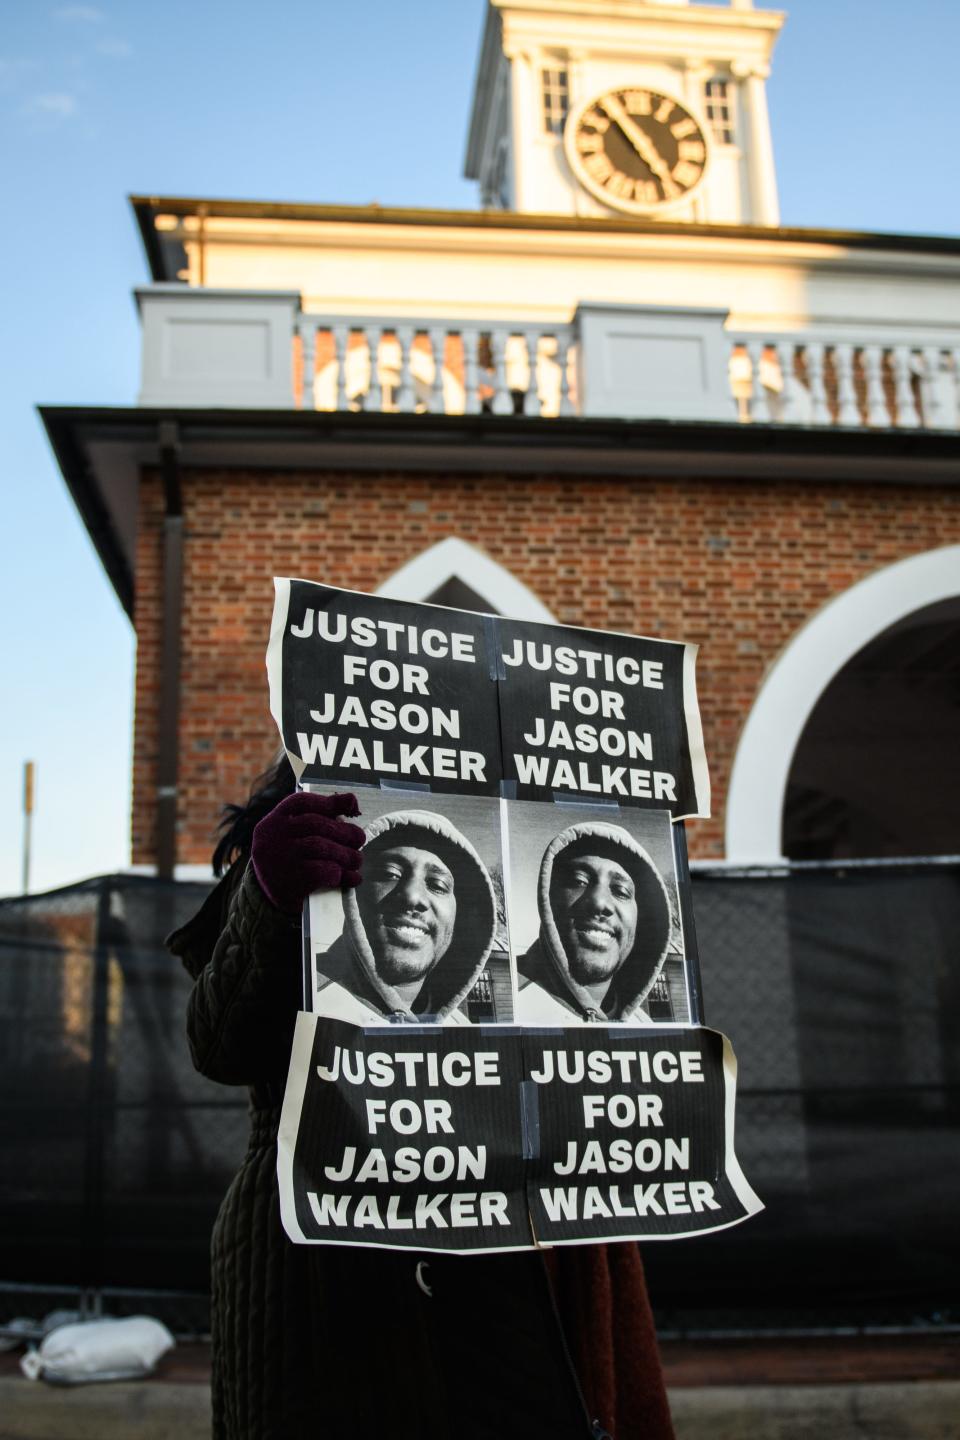 Demonstrators march through downtown Fayetteville during a Justice for Jason Walker demonstration on Thursday, Jan. 13, 2022. Jason Walker, 37, was shot and killed on Saturday by an off-duty Cumberland County Sheriff’s deputy.